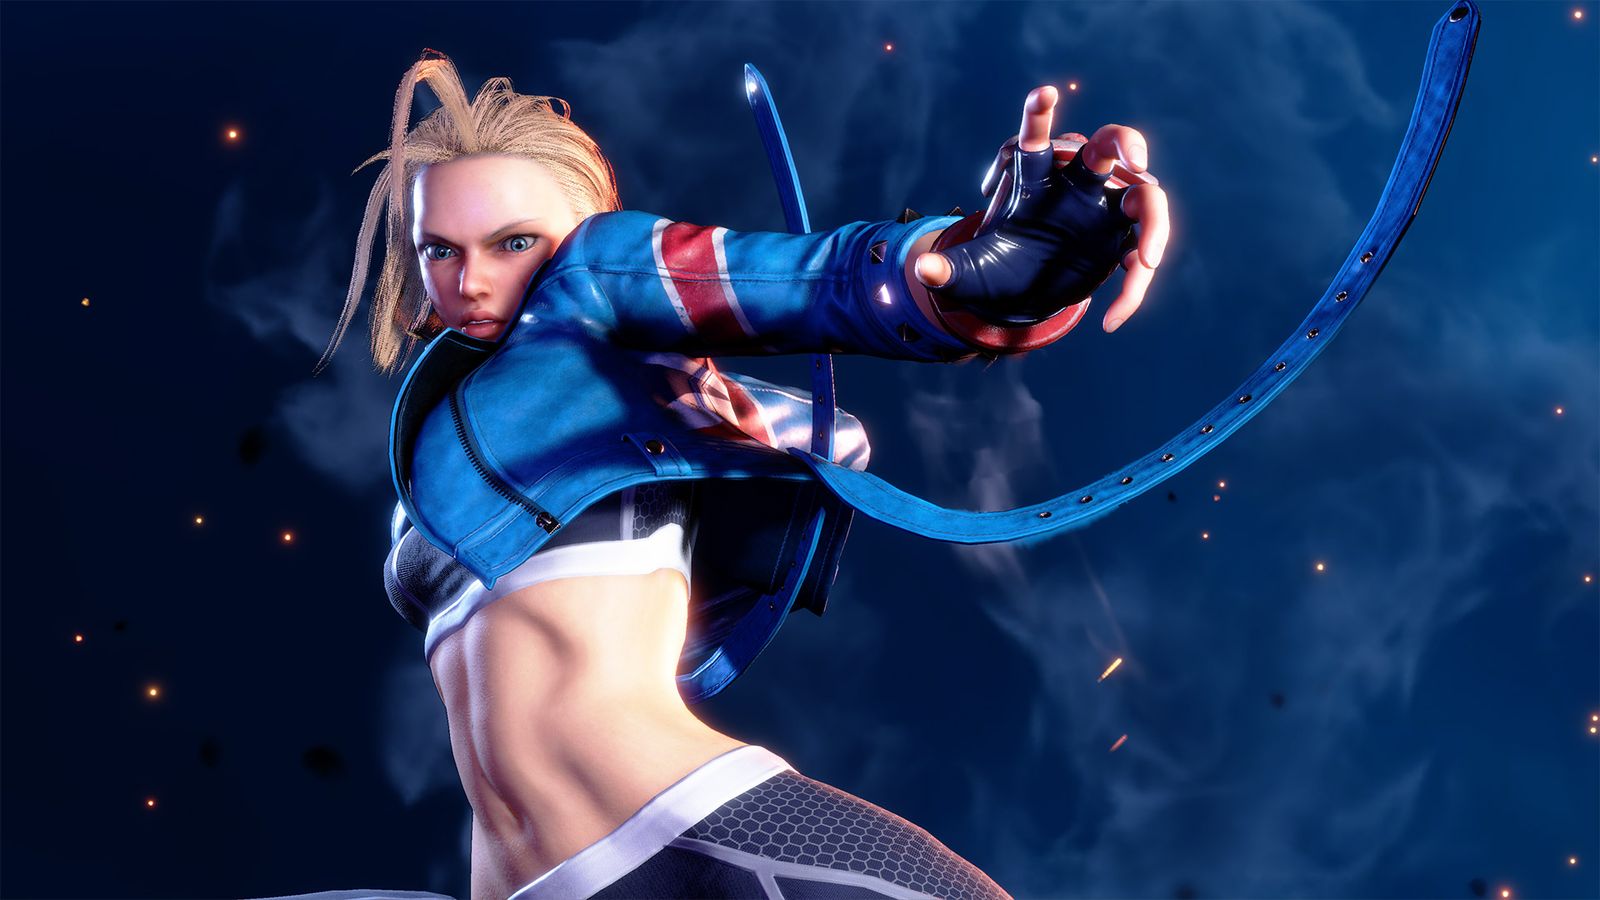 A fighter wearing a jacket while powering up a move in Street Fighter 6.